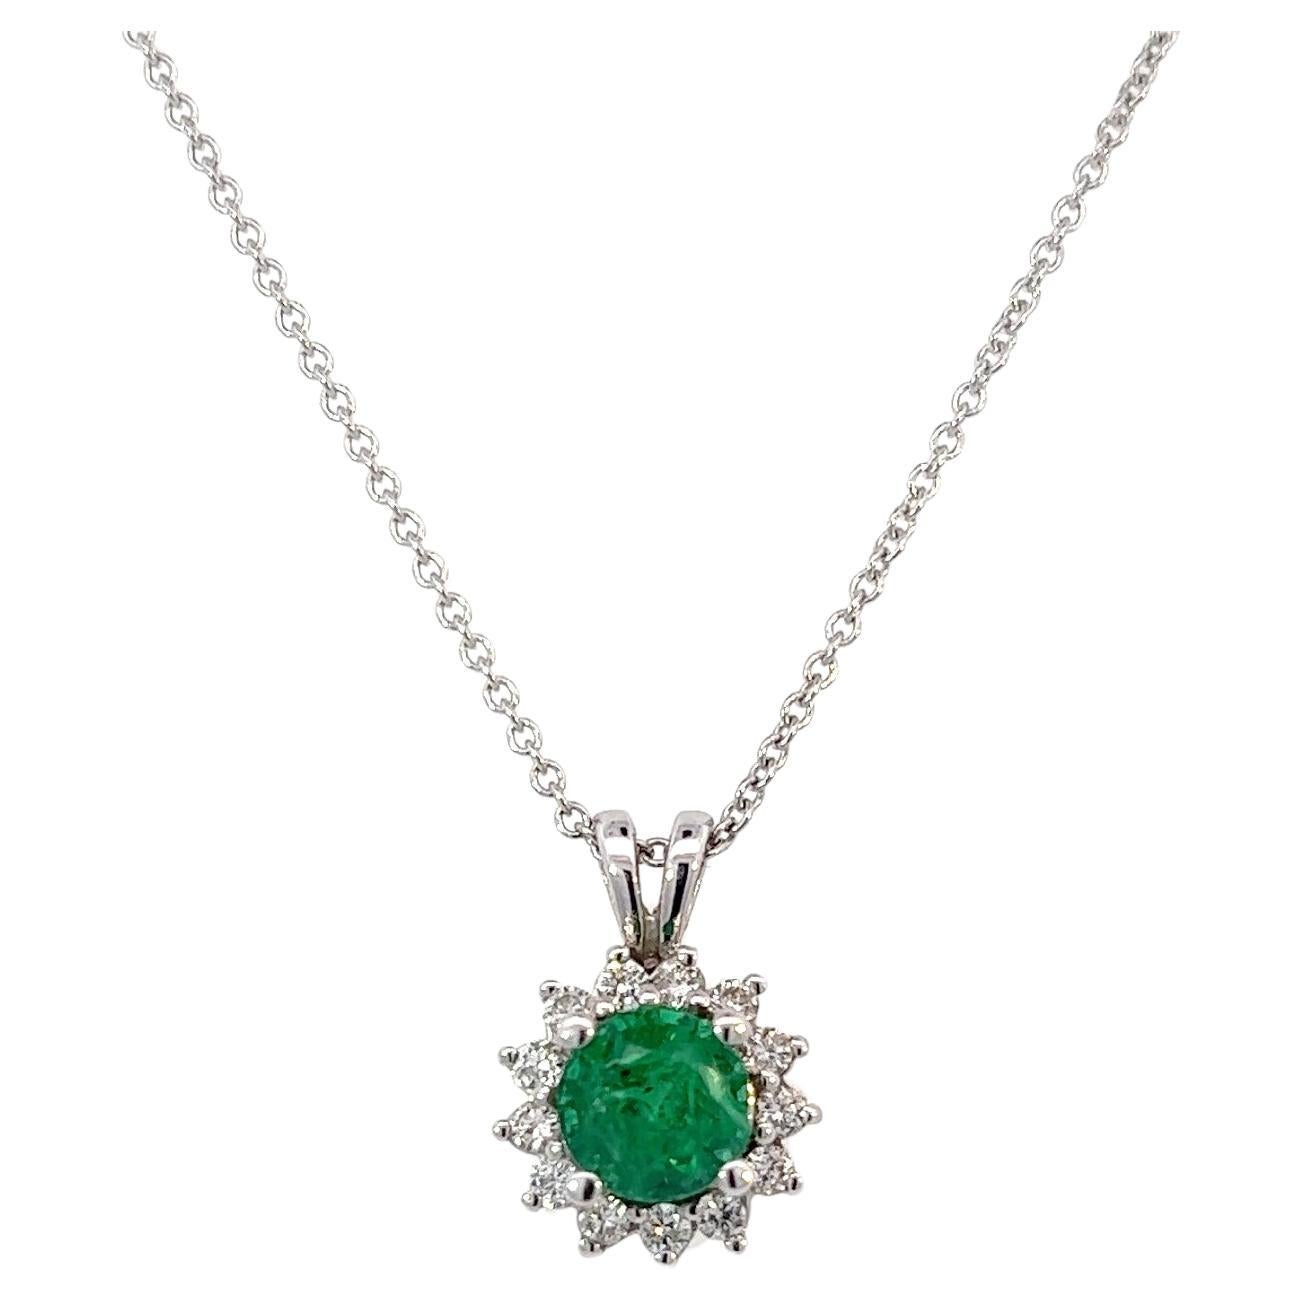 Natural Emerald Diamond Pendant With Chain 17.5" 14k WG 1.35 TCW Certified